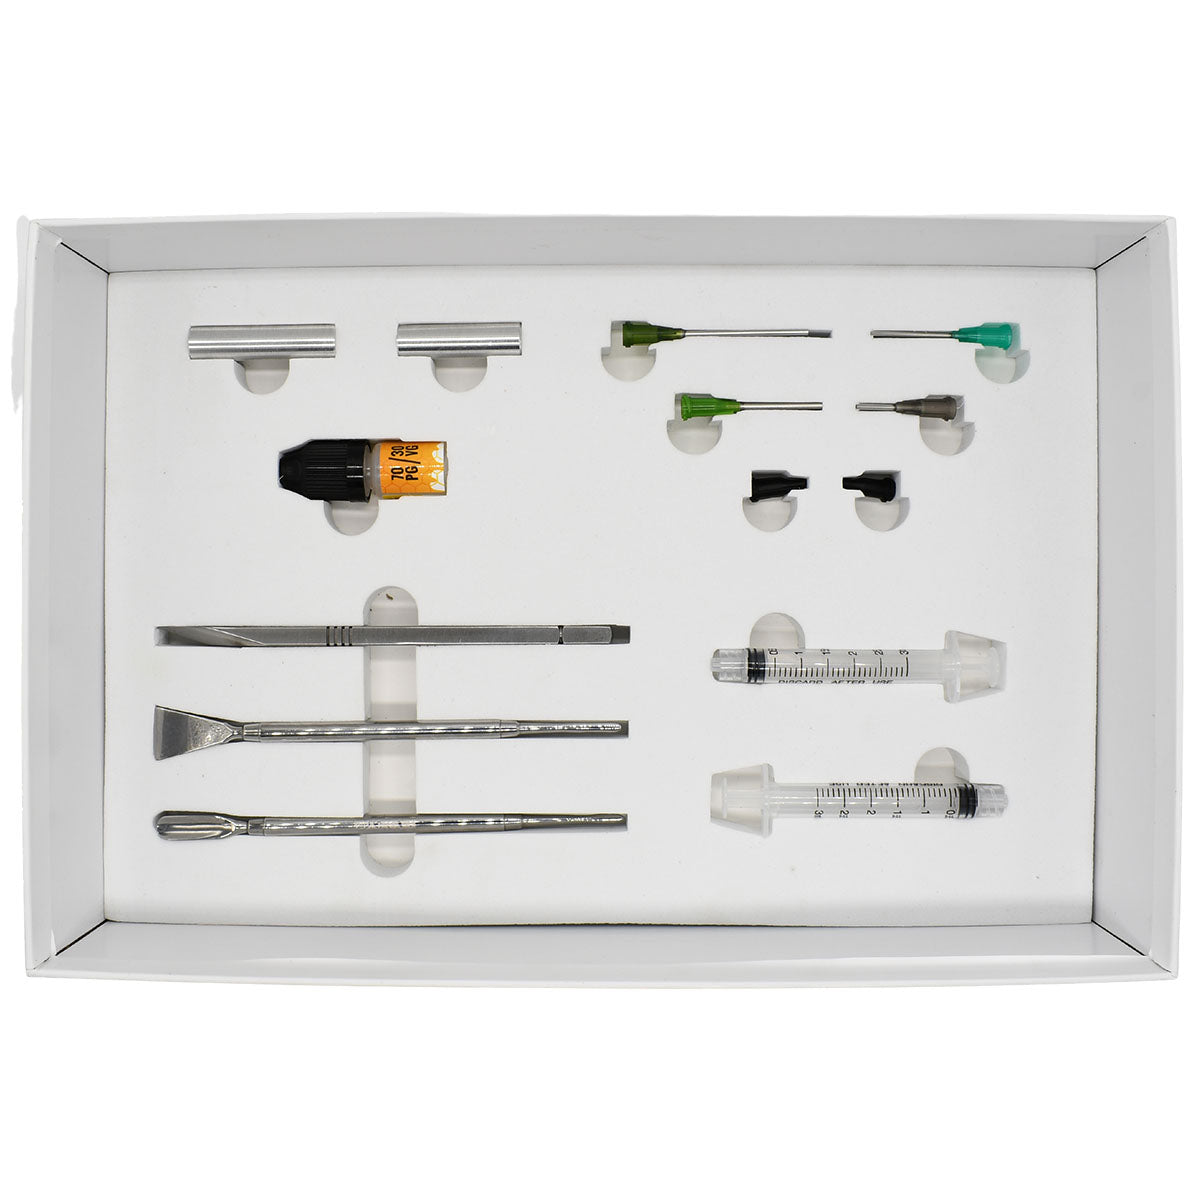 Tools to remove oil from prefilled cartridge 2nd level packing of CartDub Complete Kit